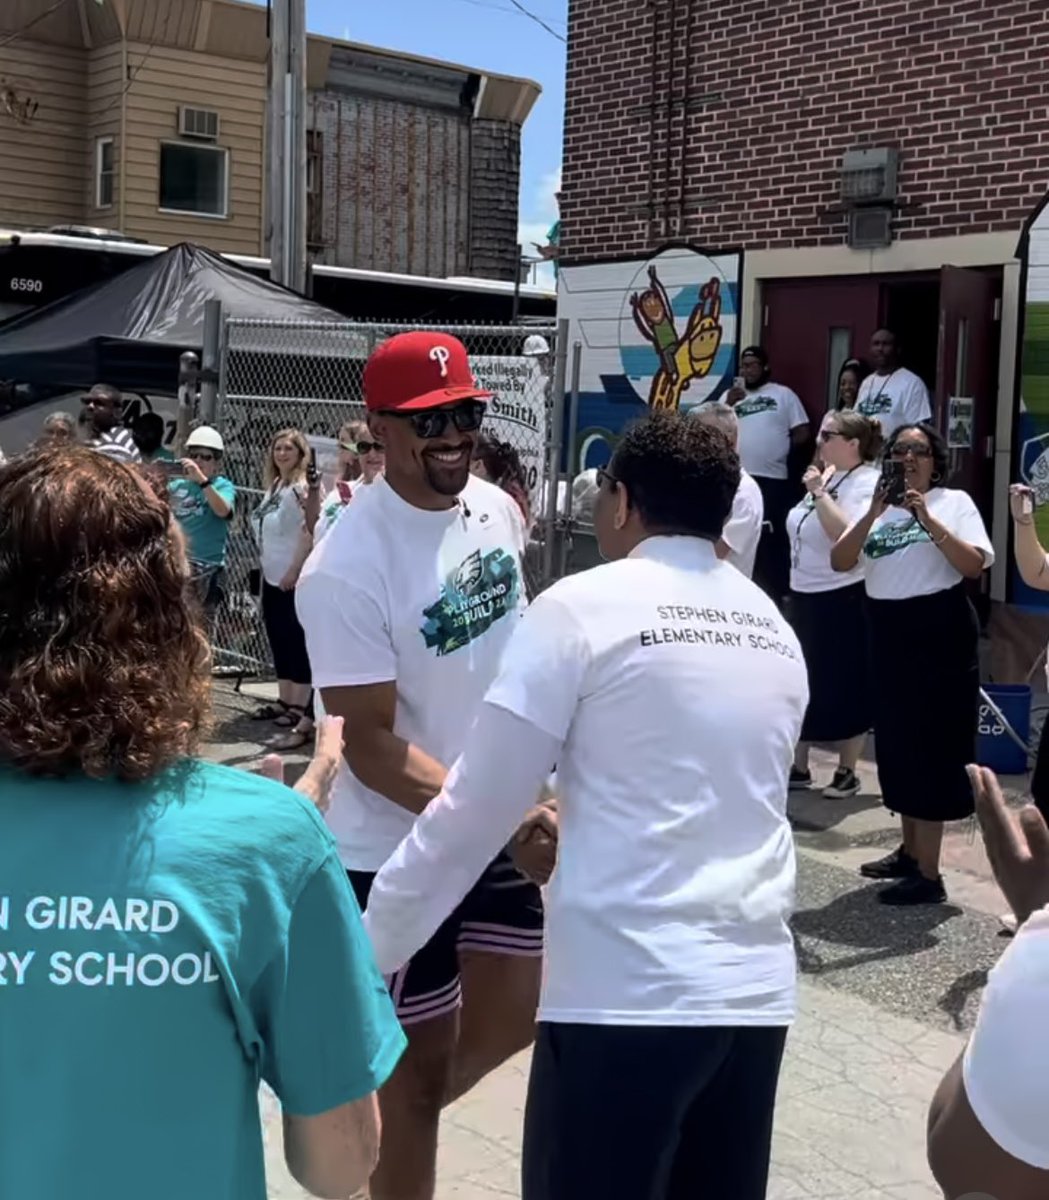 Eagles quarterback Jalen Hurts and the entire team were there today for their annual playground build at the Stephen Girard elementary school in Philly. The Eagles organization every year since 1997 has helped rebuild a playground in Philly. 
📸 @EaglesInsider